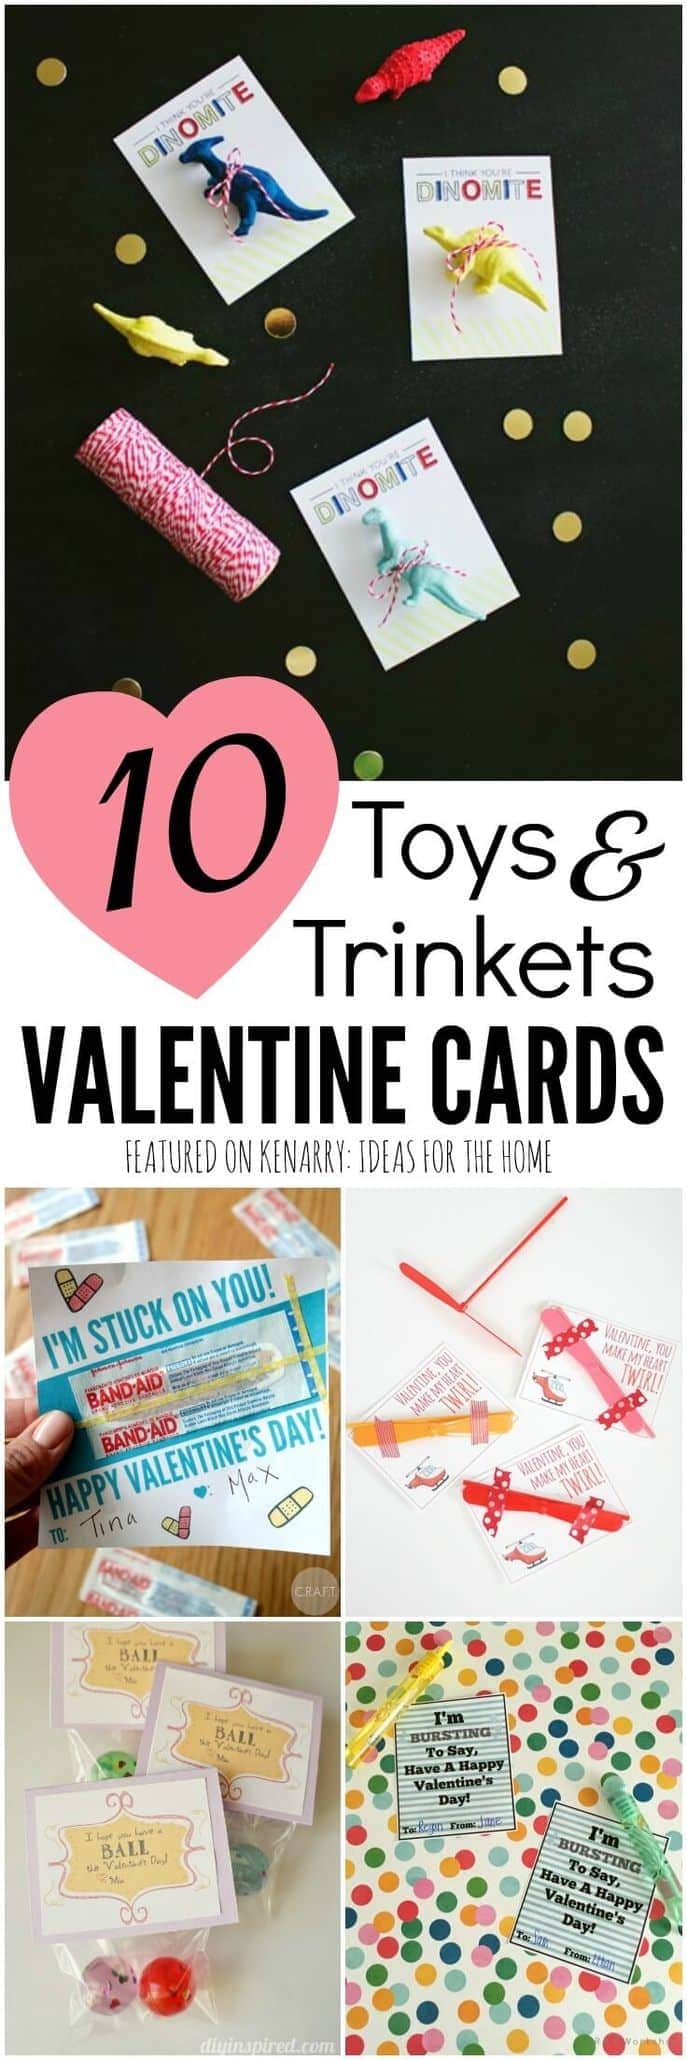 Love these great ideas for kids valentine cards that don't involve candy! 10 clever ways for using toys and trinkets for Valentine's Day party treats for school instead.